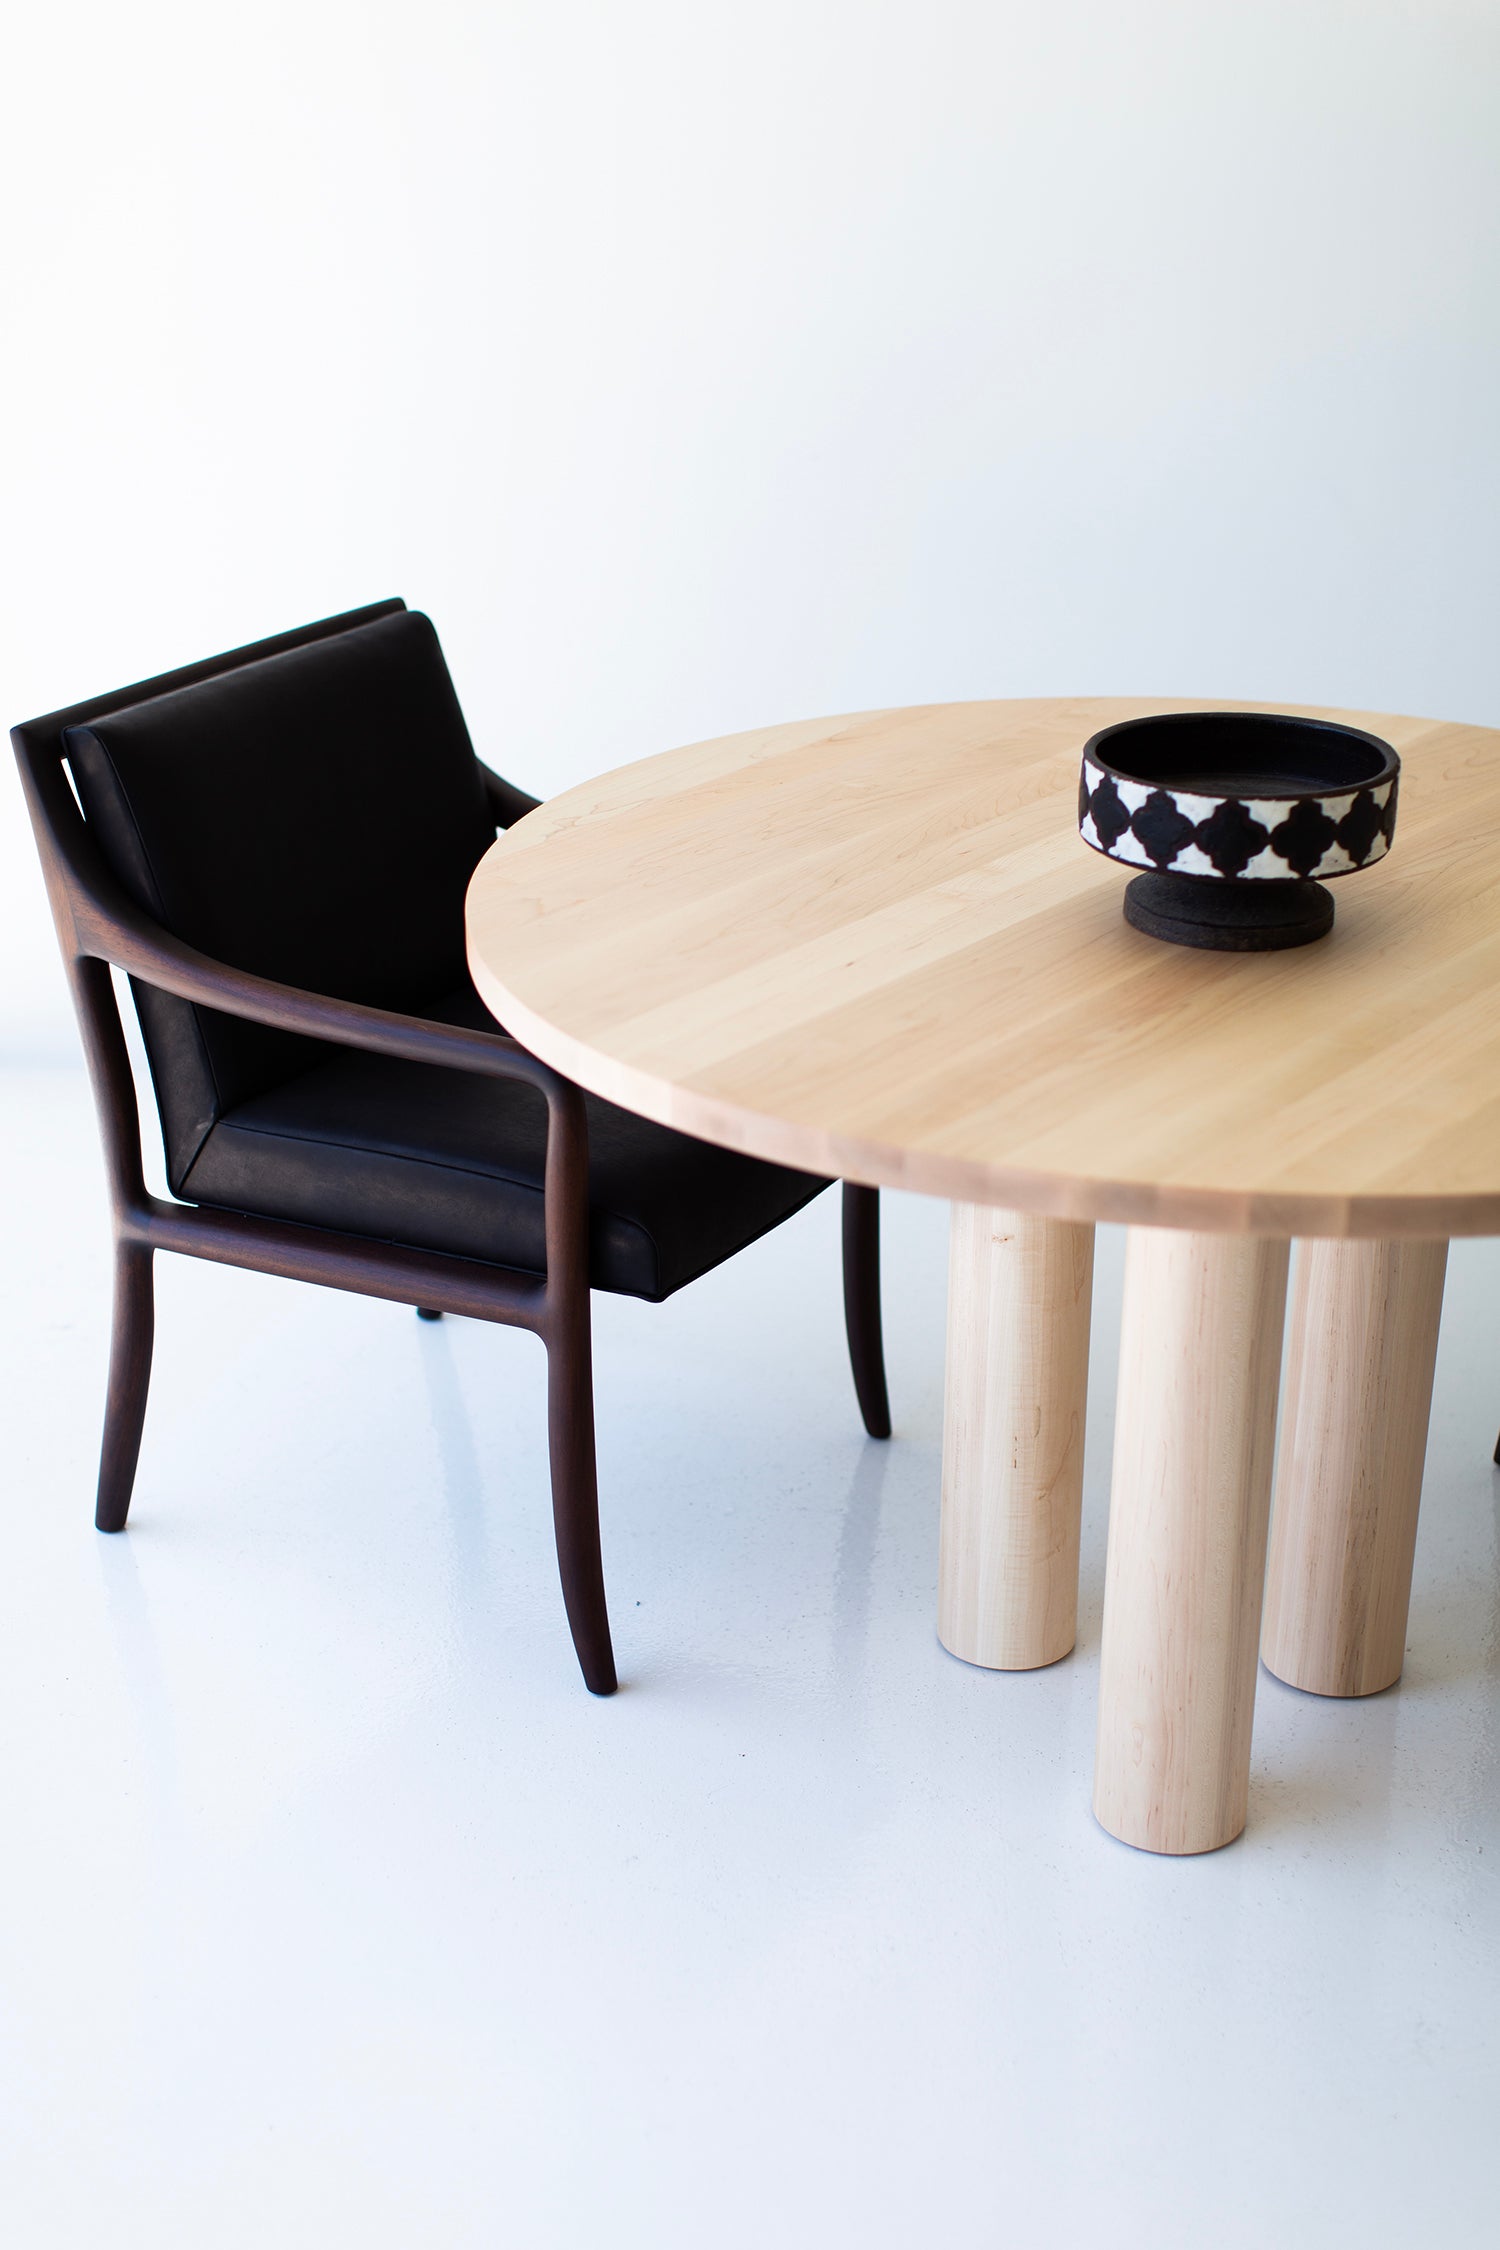 Cava Modern Round Dining Table in Maple - 4223